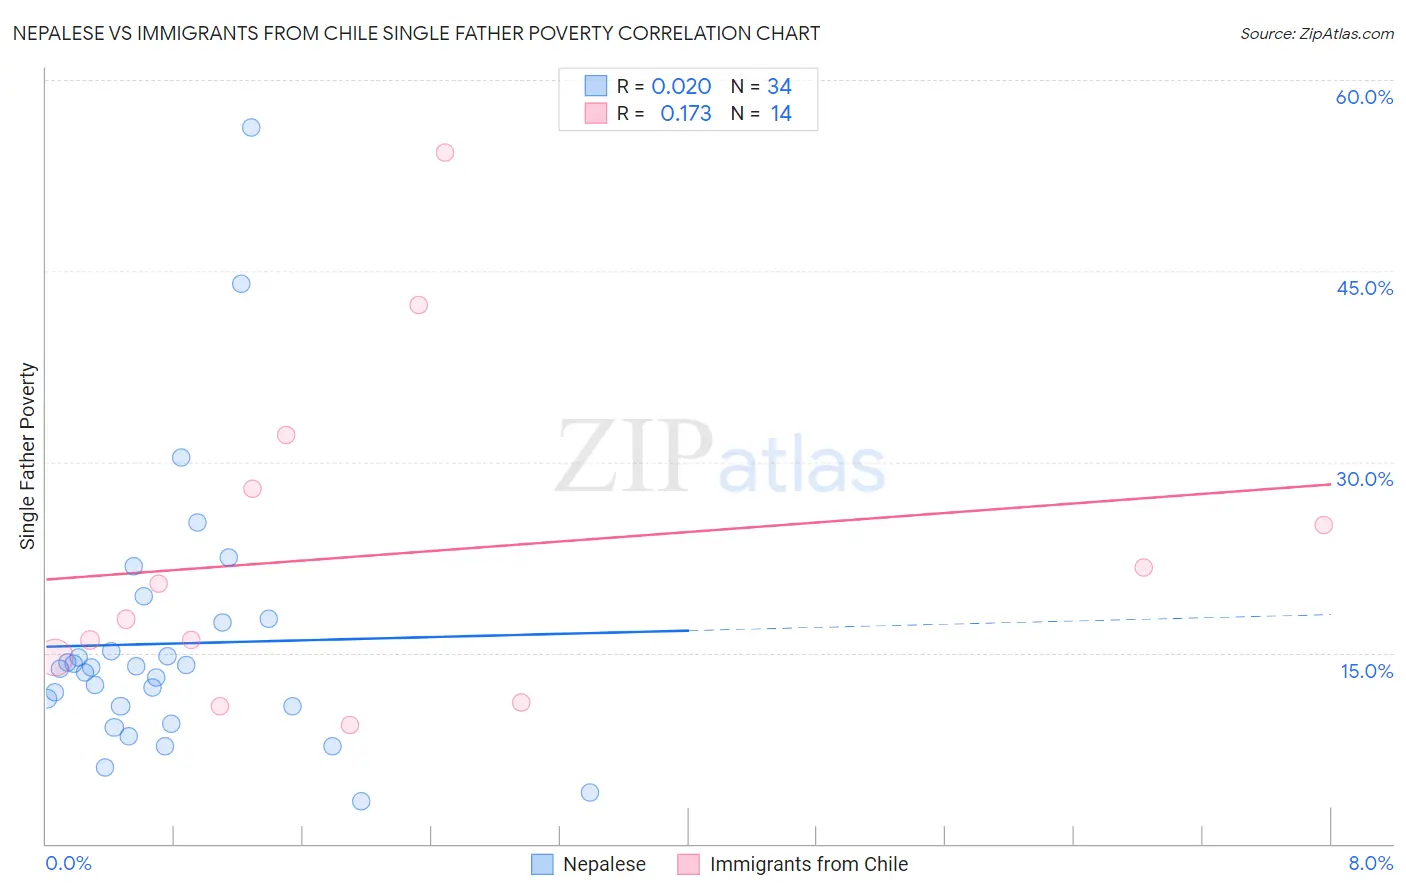 Nepalese vs Immigrants from Chile Single Father Poverty